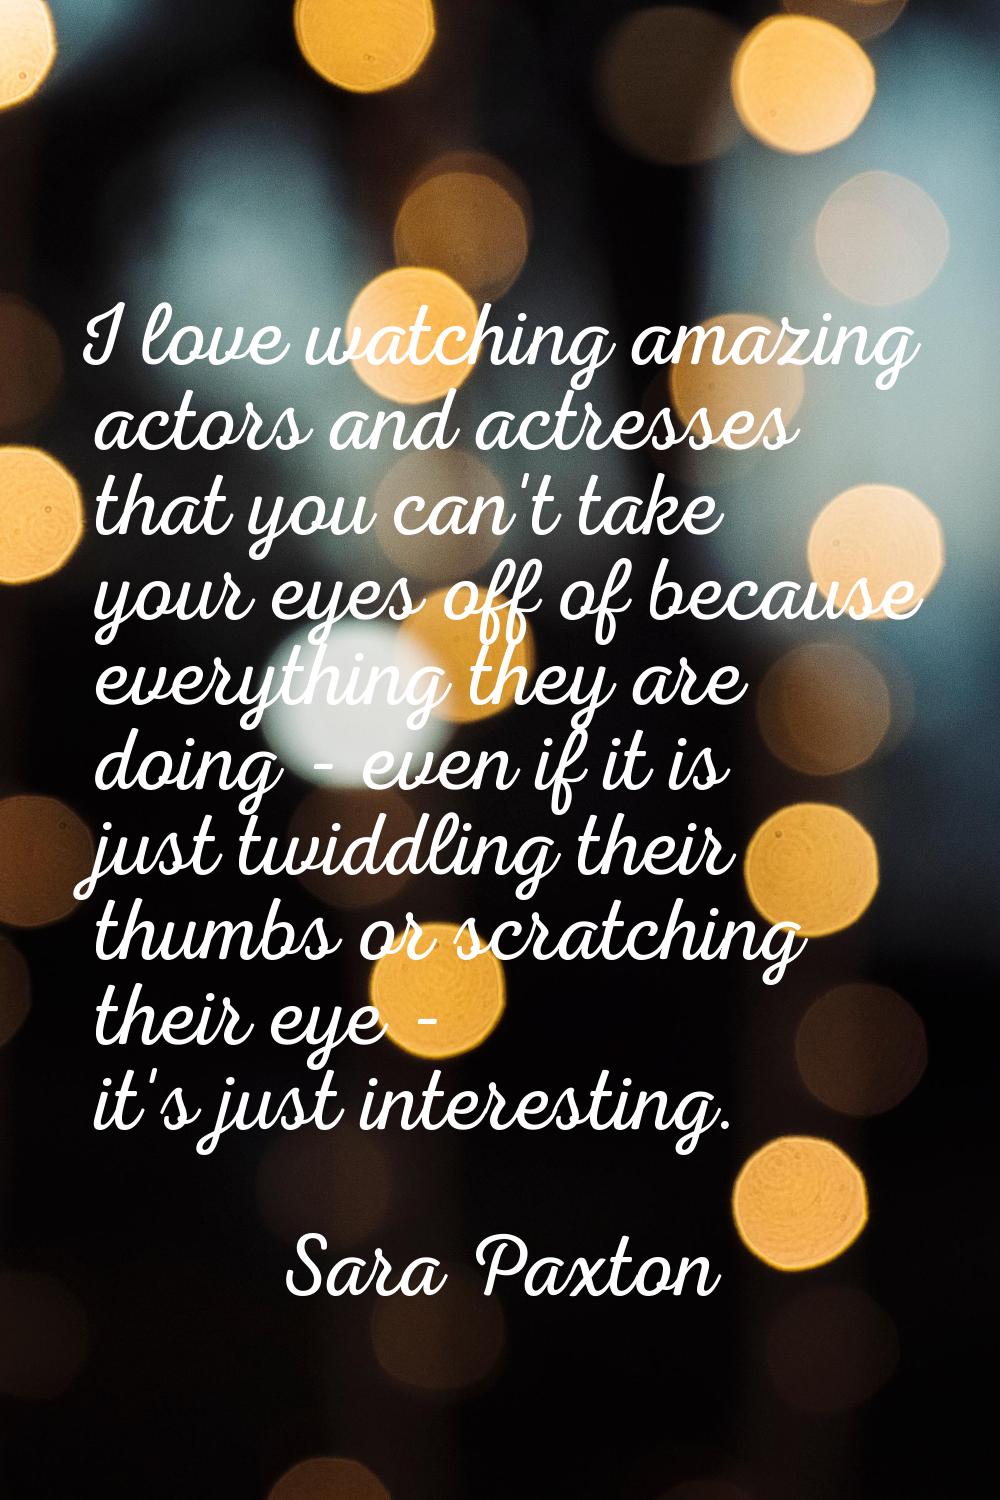 I love watching amazing actors and actresses that you can't take your eyes off of because everythin